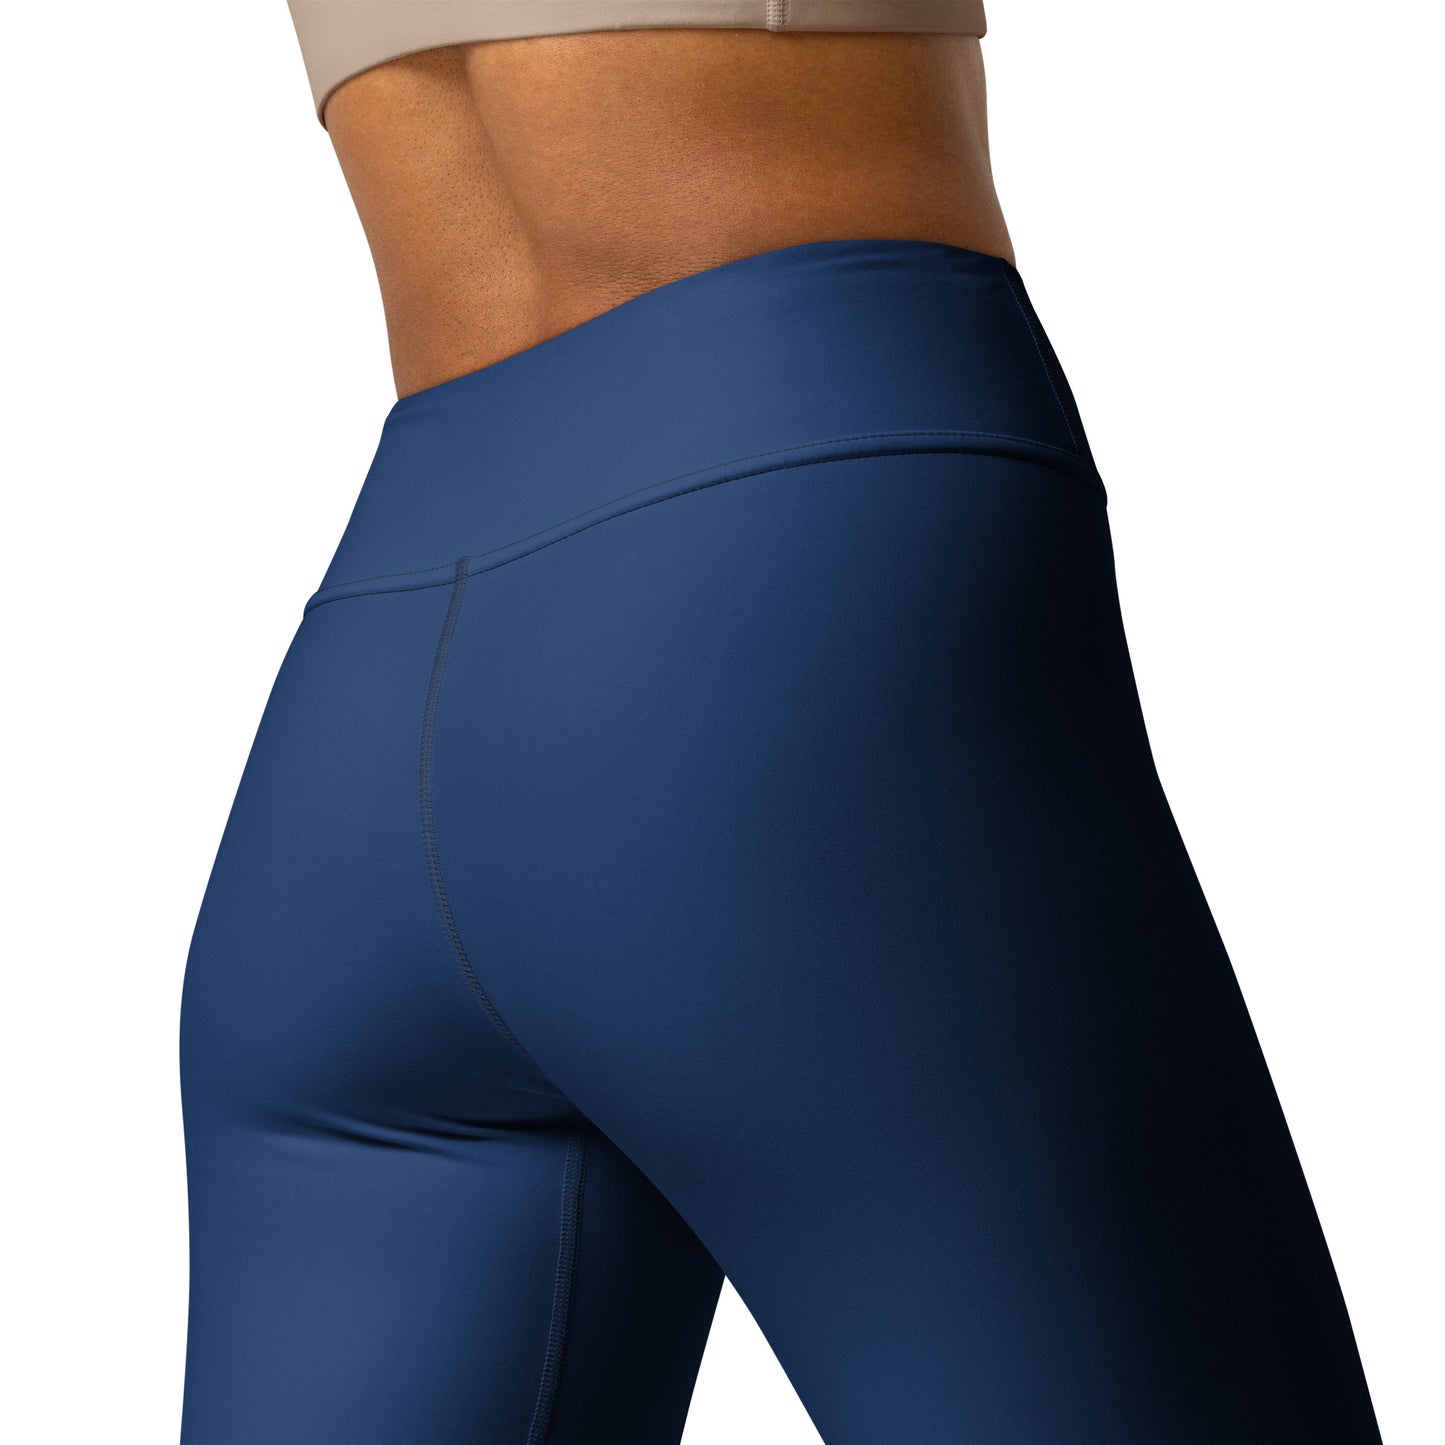 ELEVATED ESSENTIALS, THE PERFECT HIGH WAISTBAND LEGGING NOTRE DAME